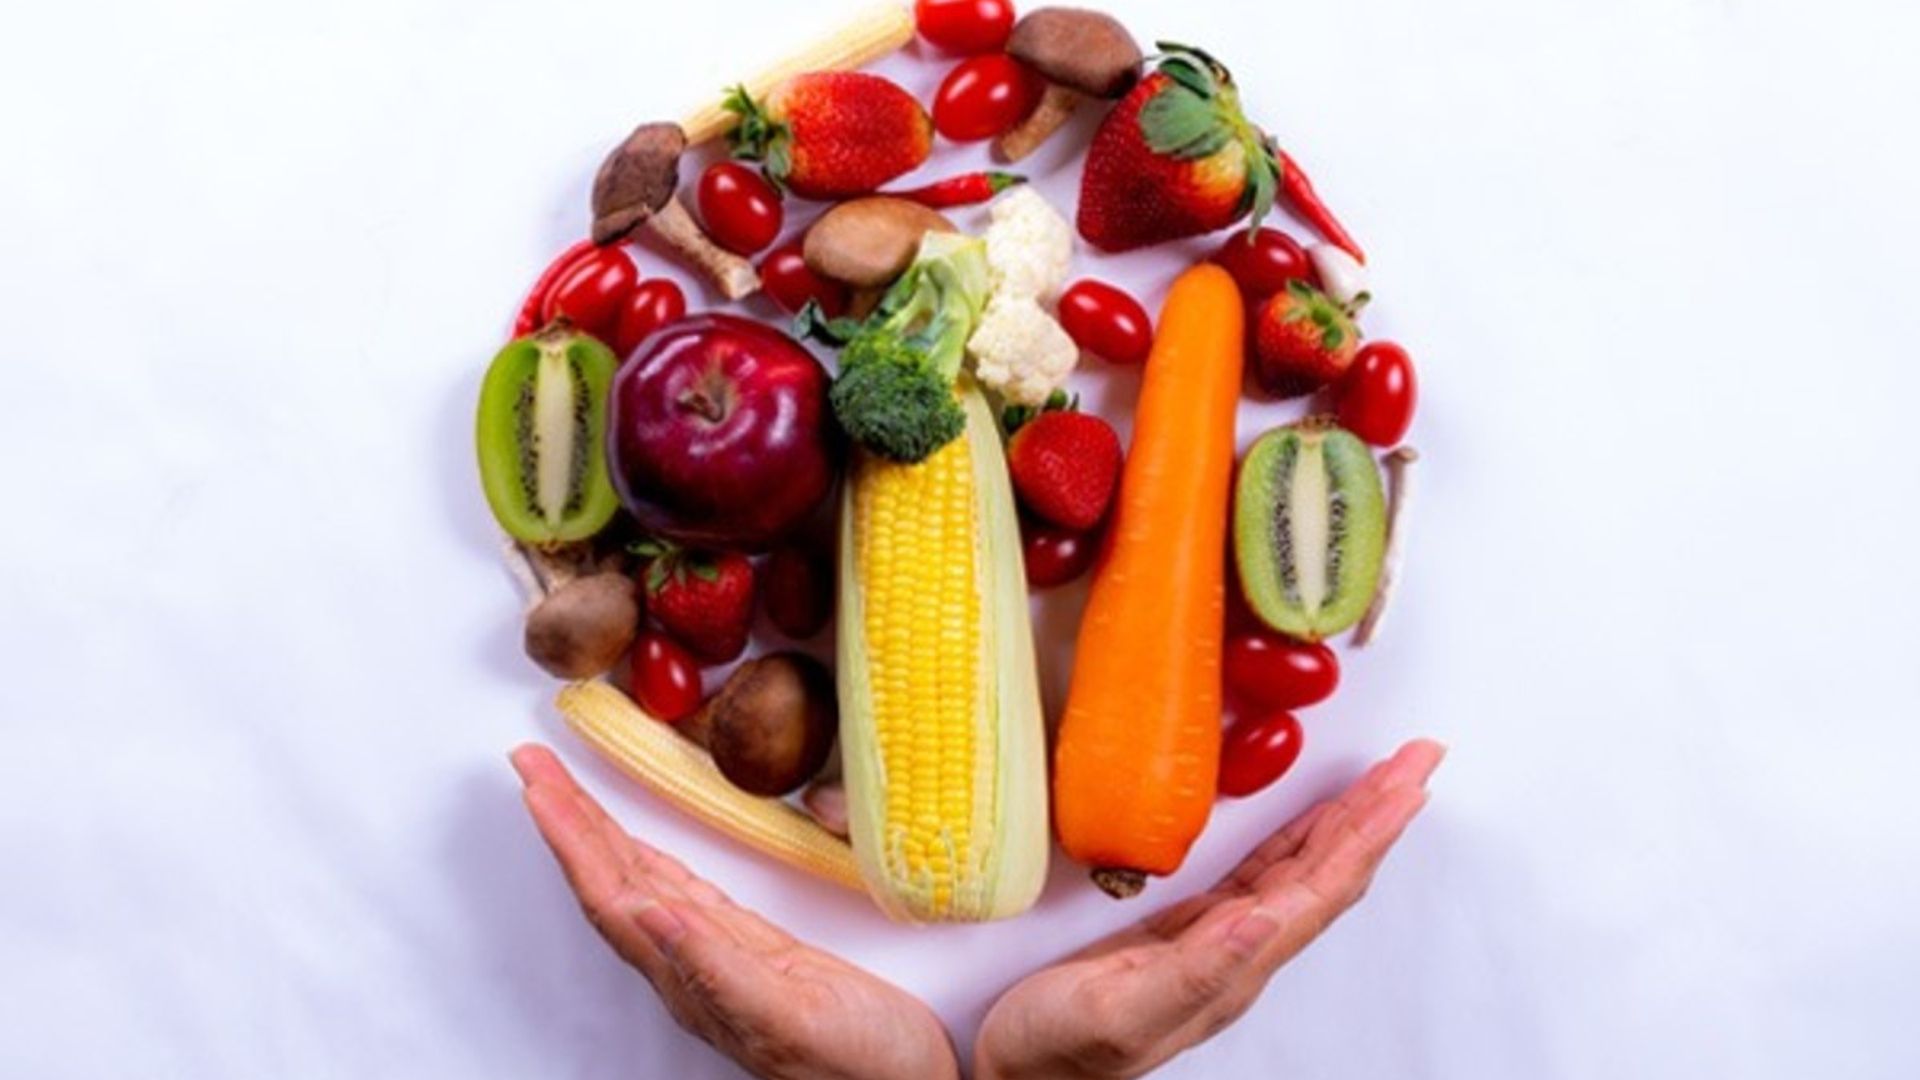 Image of fruit and vegetables arranged in a circle